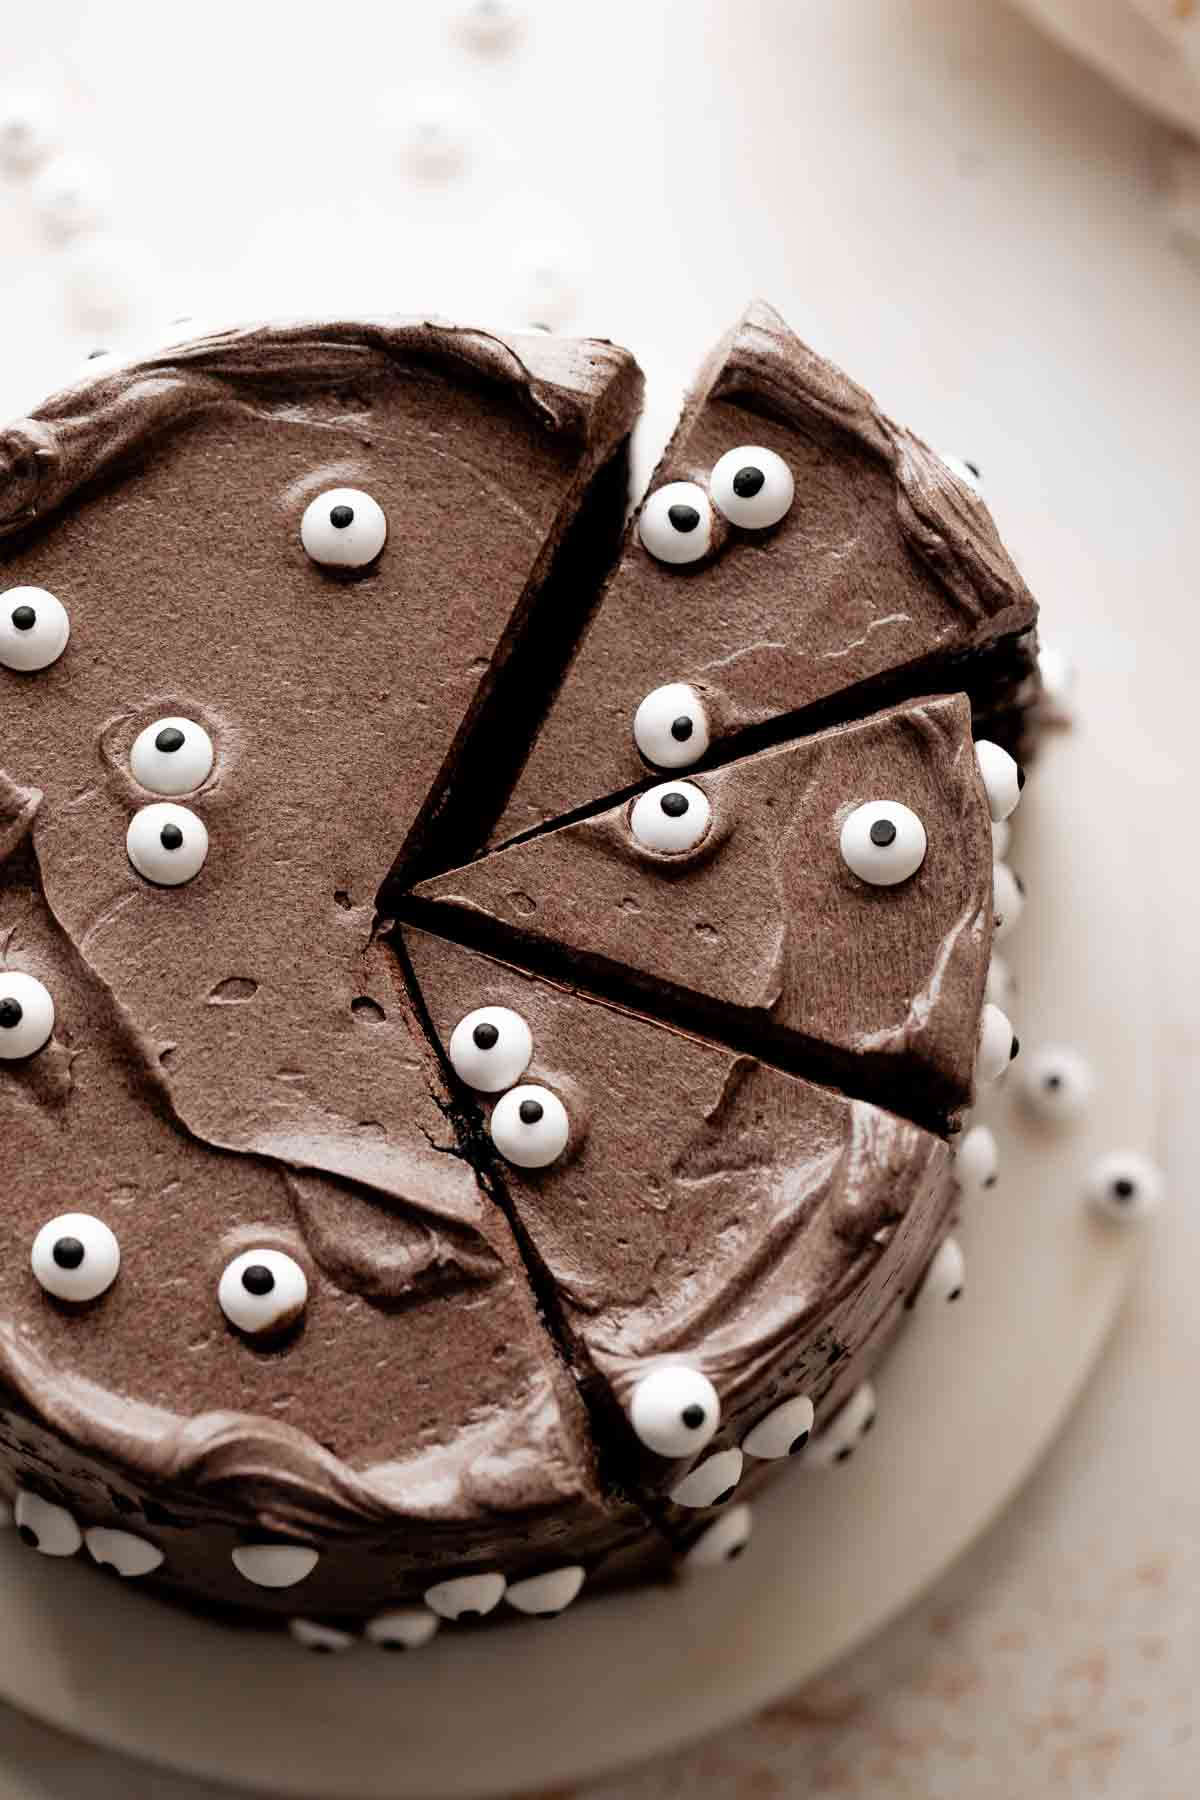 black velvet cake with three slices cut out decorated with eyeball candies.